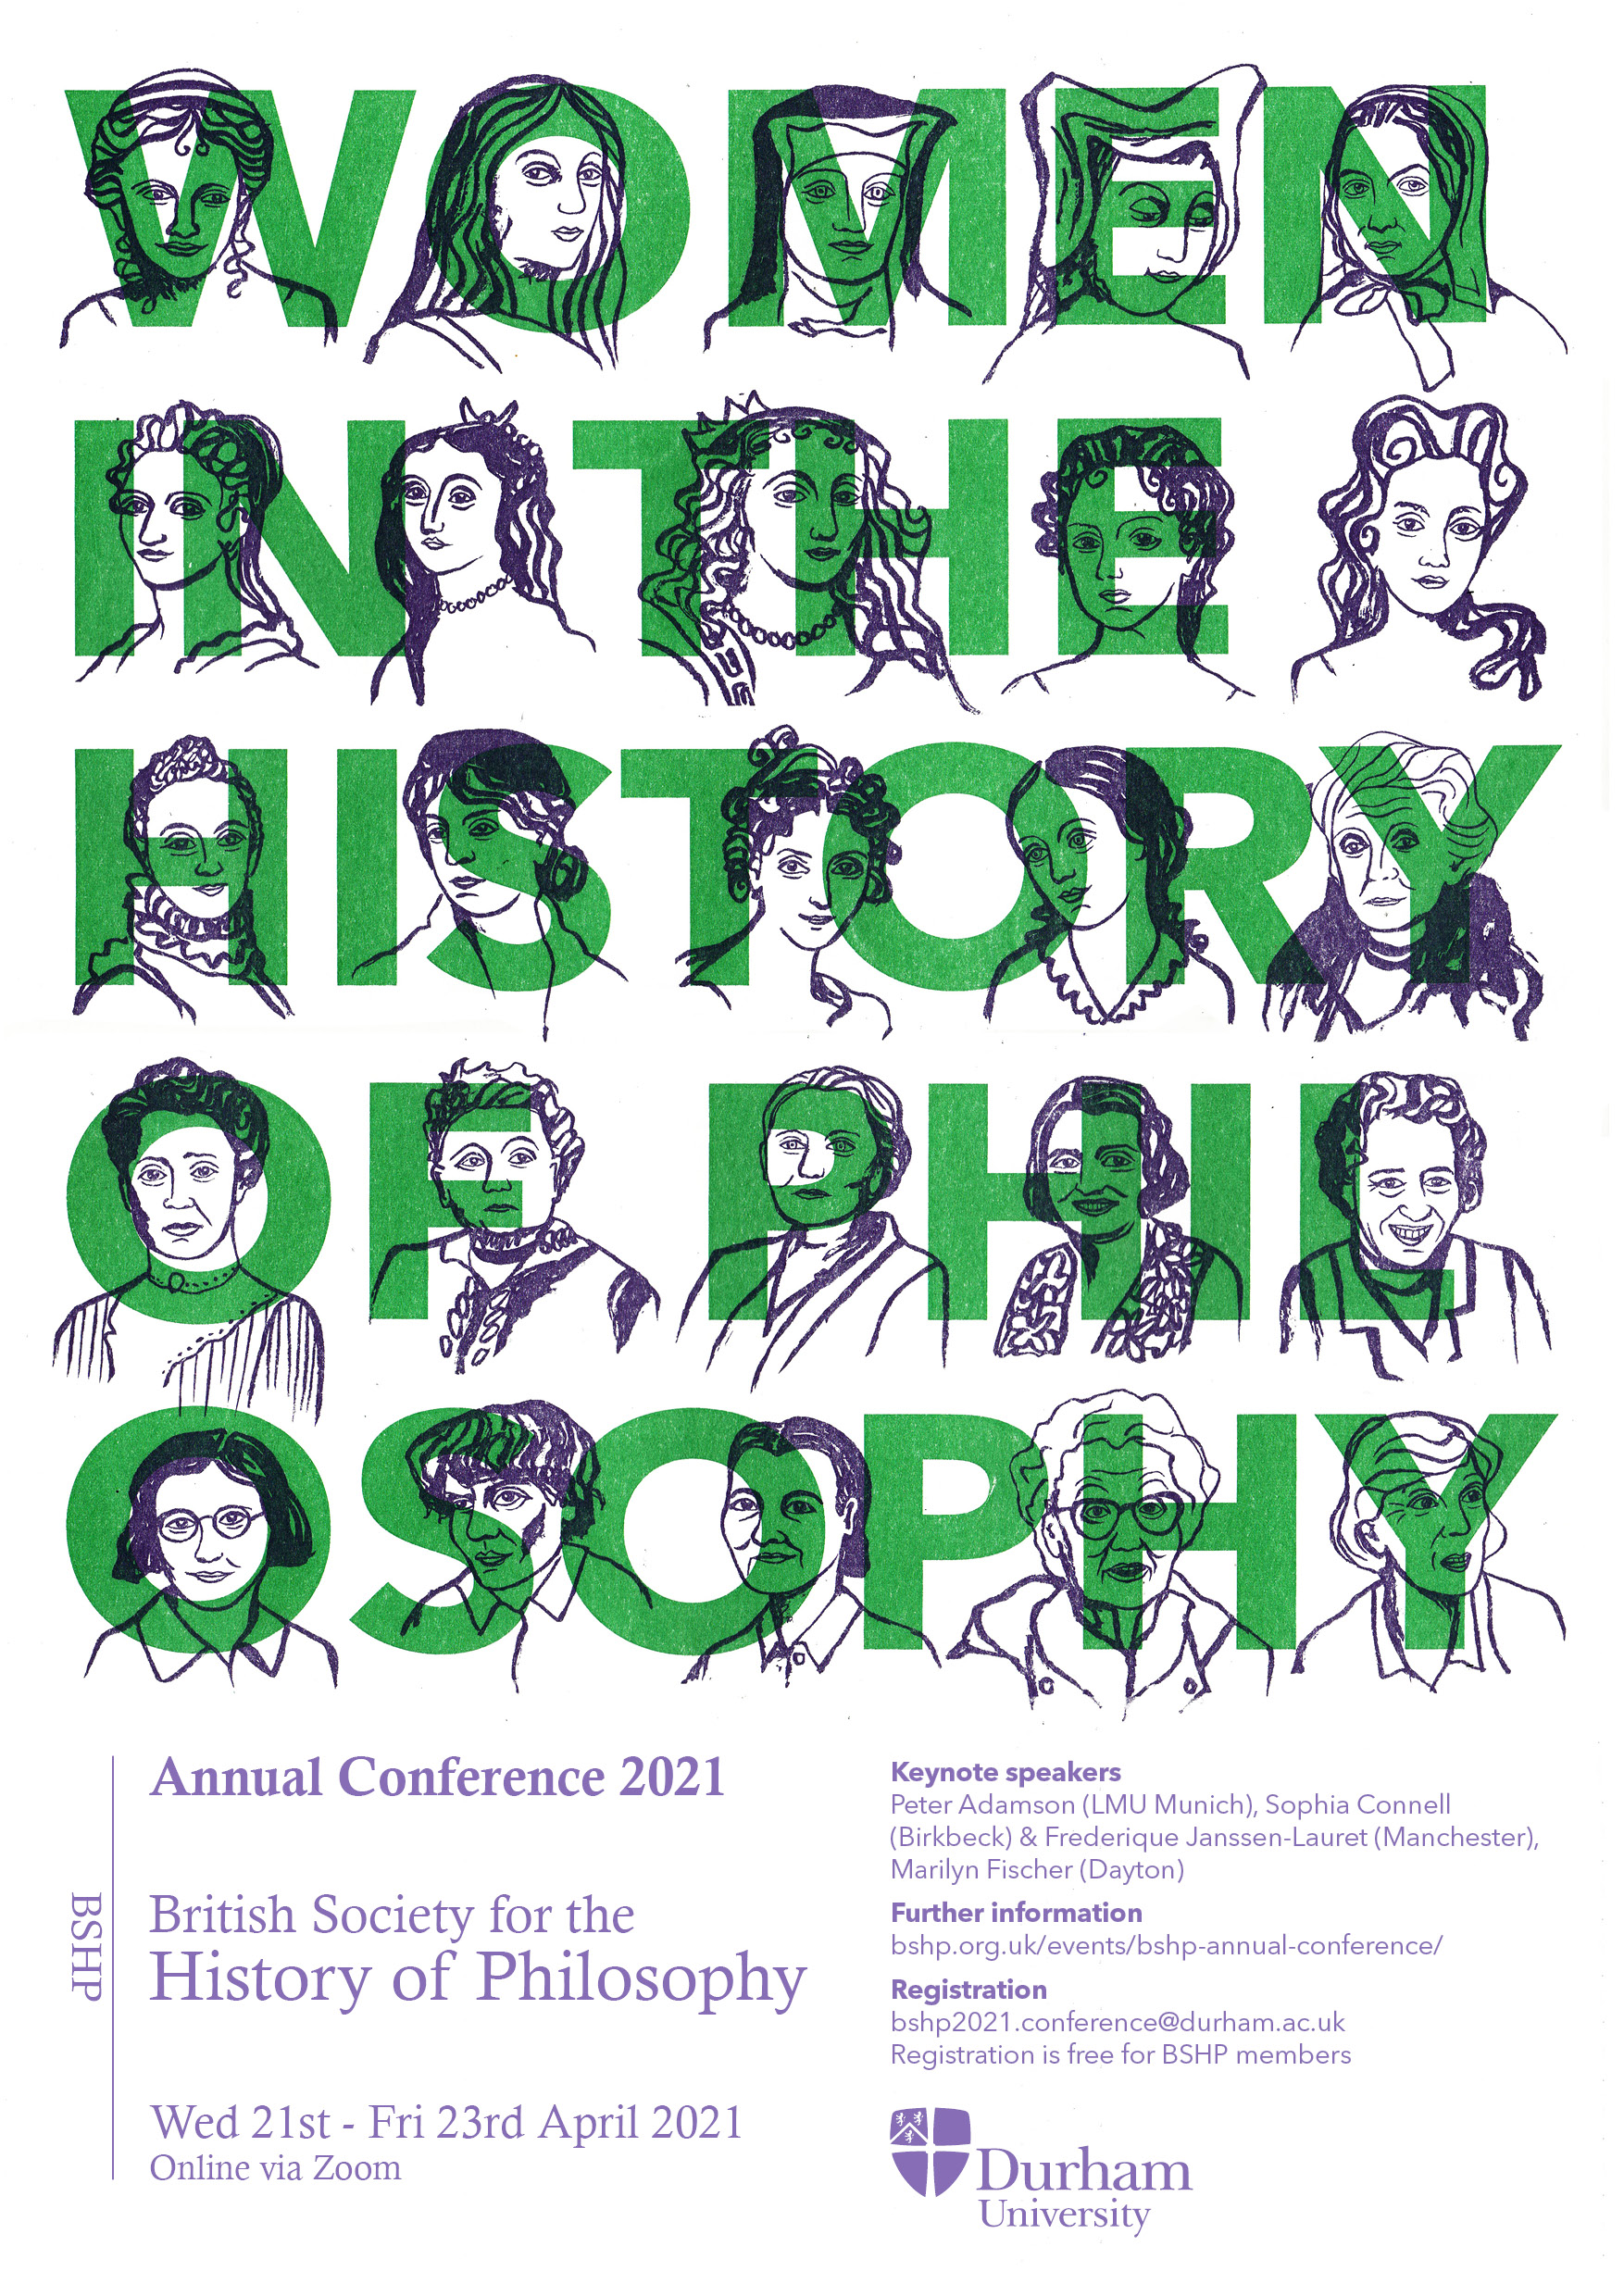 Women in the history of philosophy poster for The British Society for the History of Philosophy's annual conference